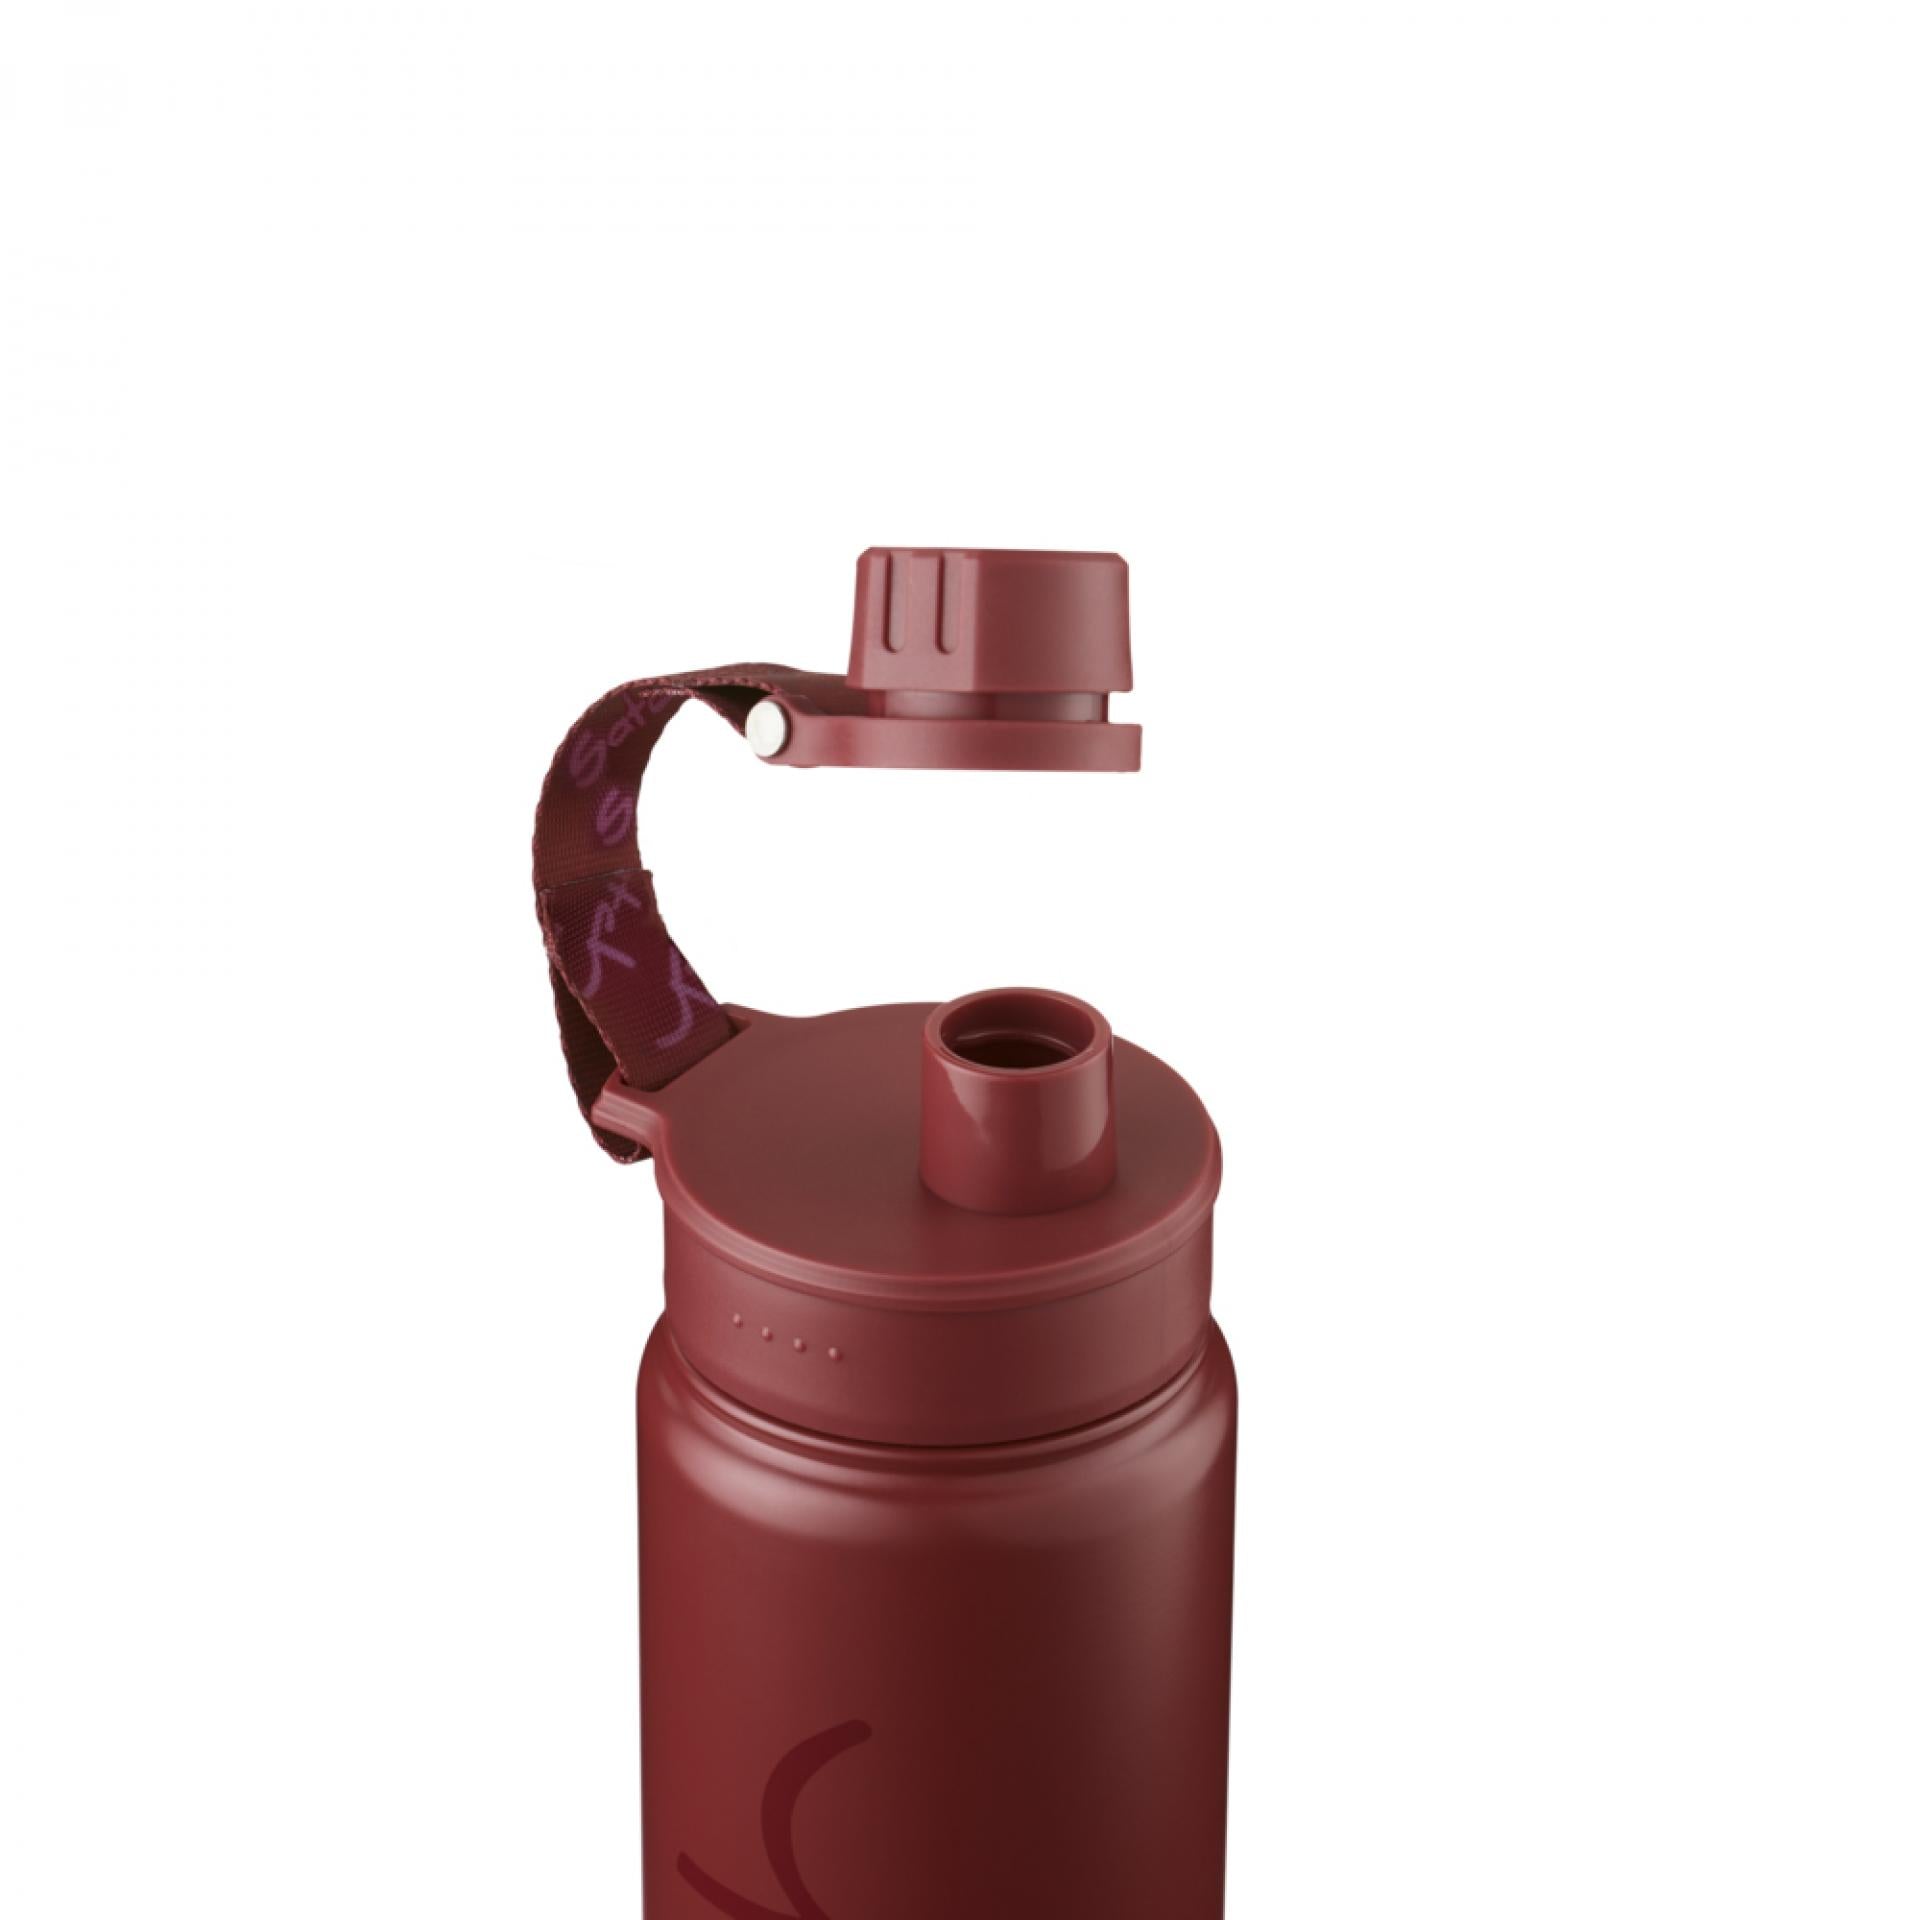 Satch Trinkflasche Edelstahl - Farbe: Berry Rot